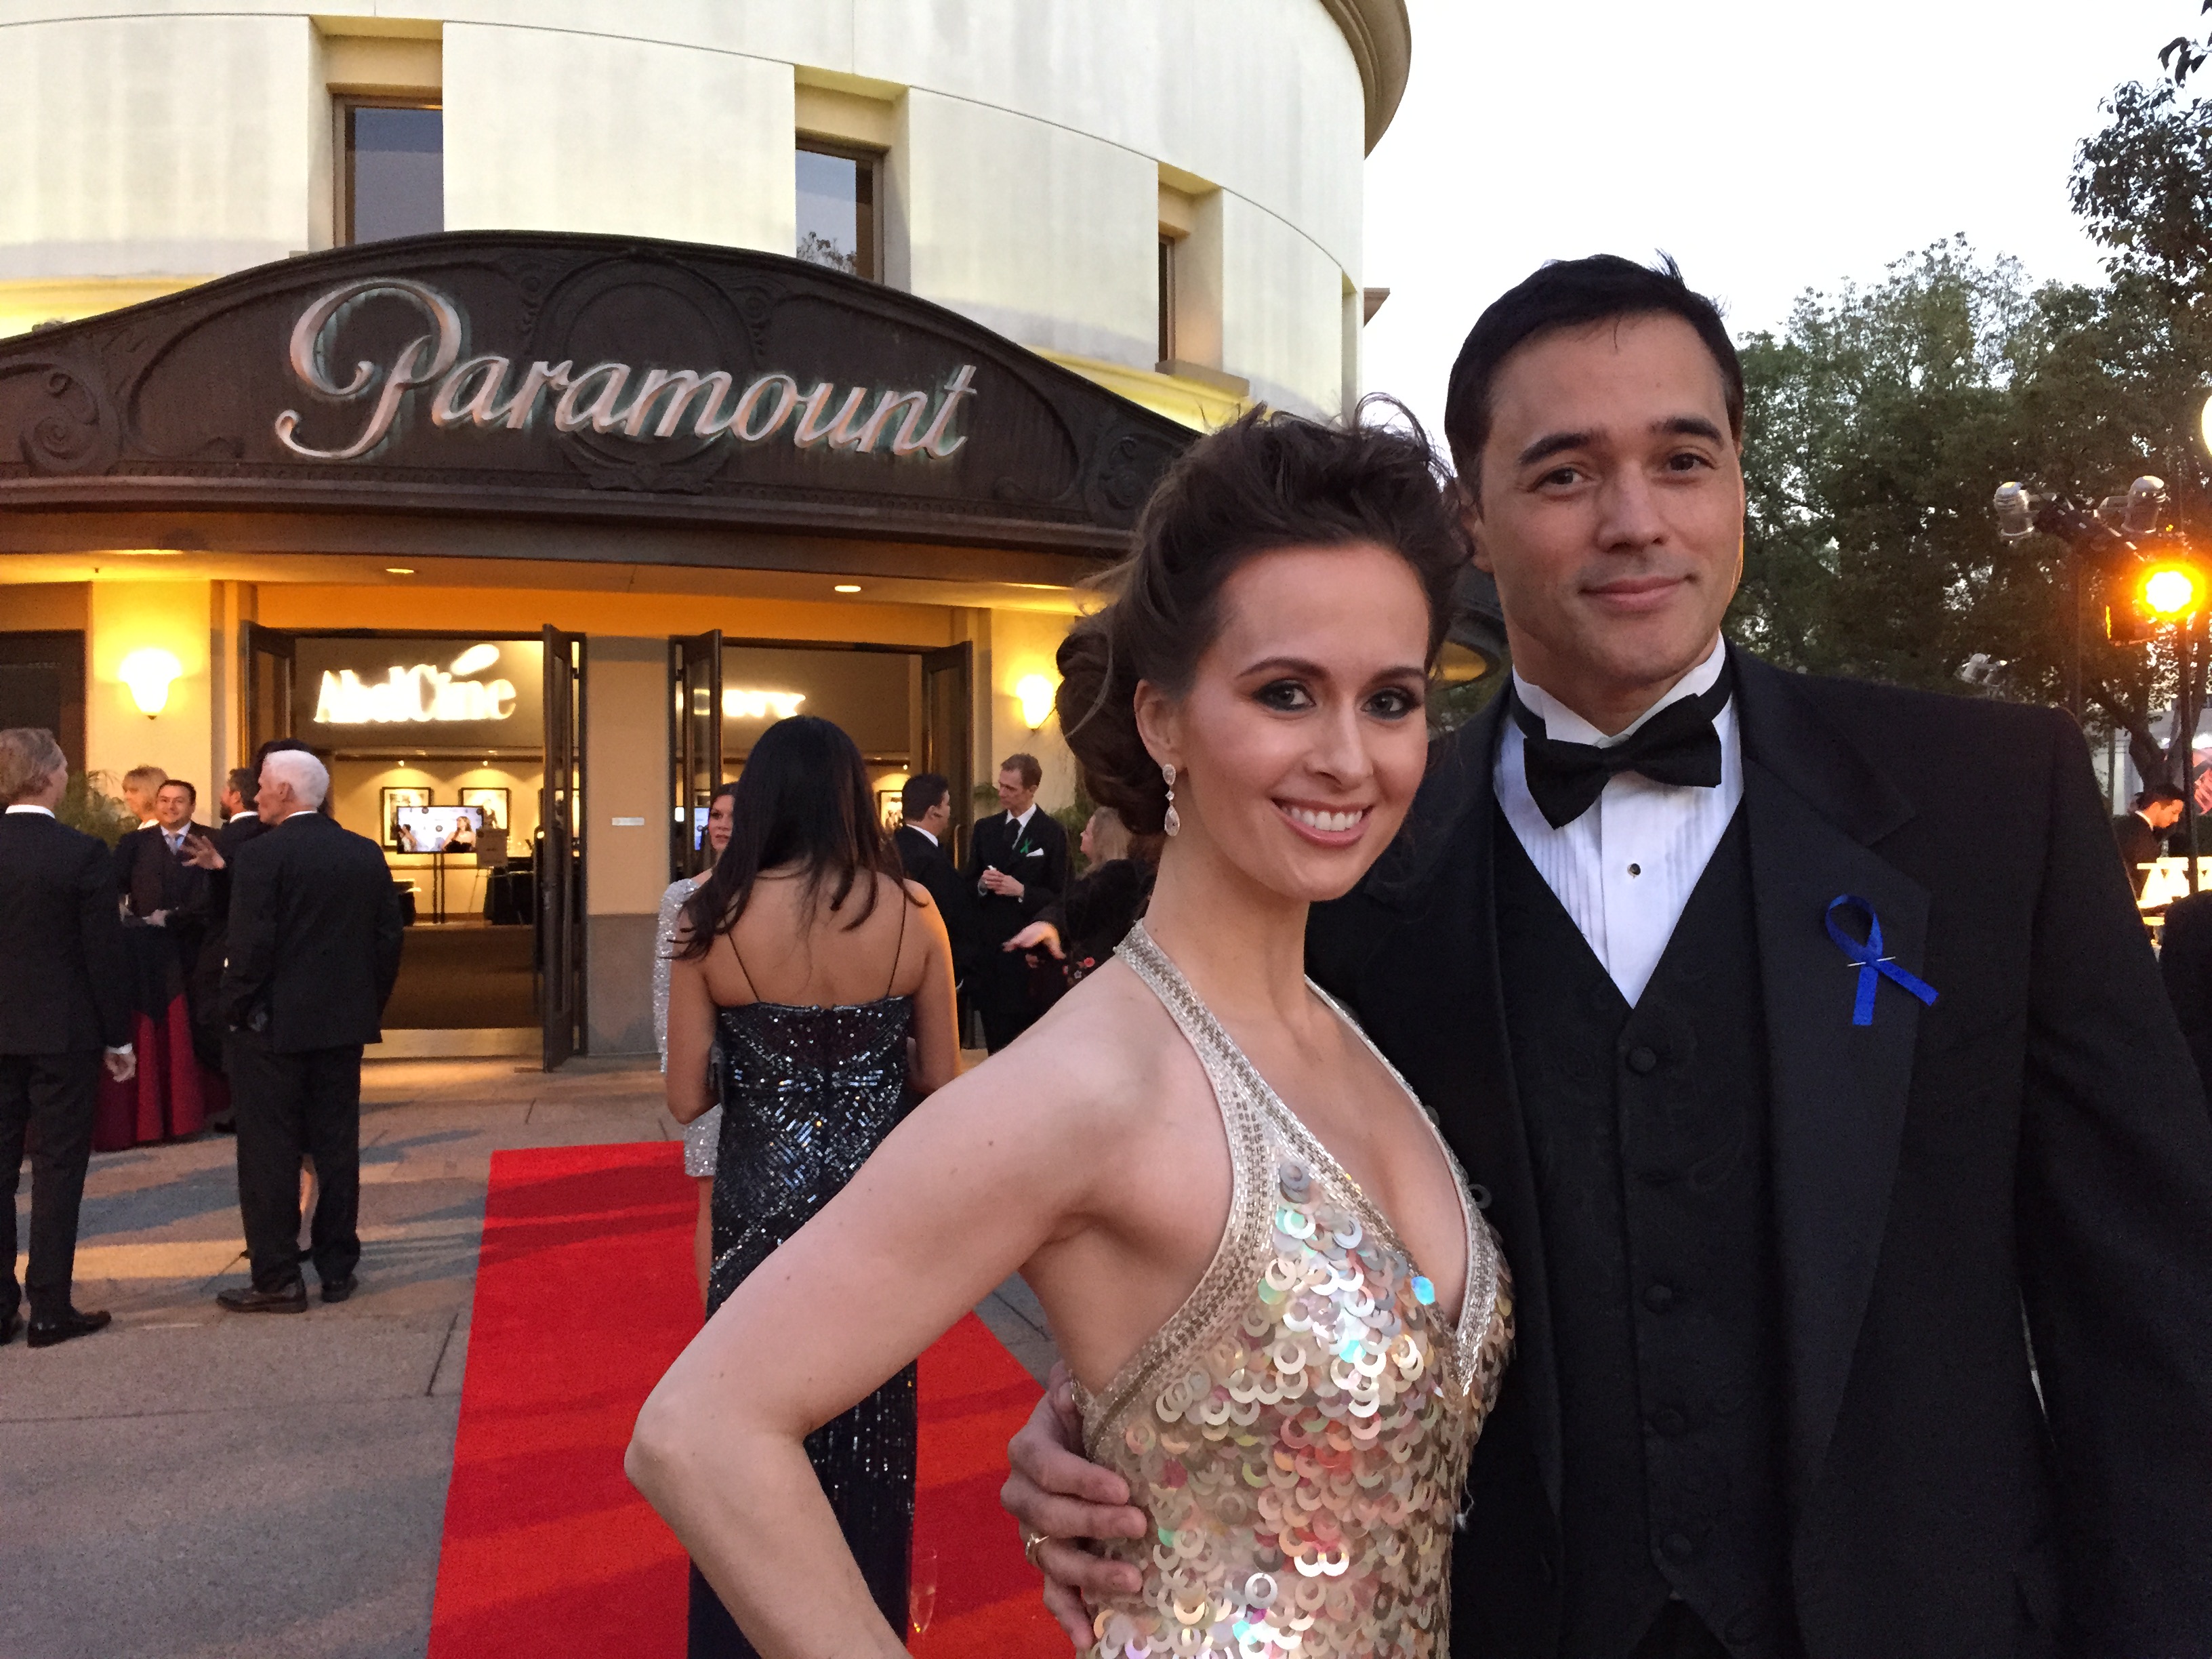 Arriving at the Society of Camera Operators Awards 2015 at Paramount Studios with Actor Scott Connors.